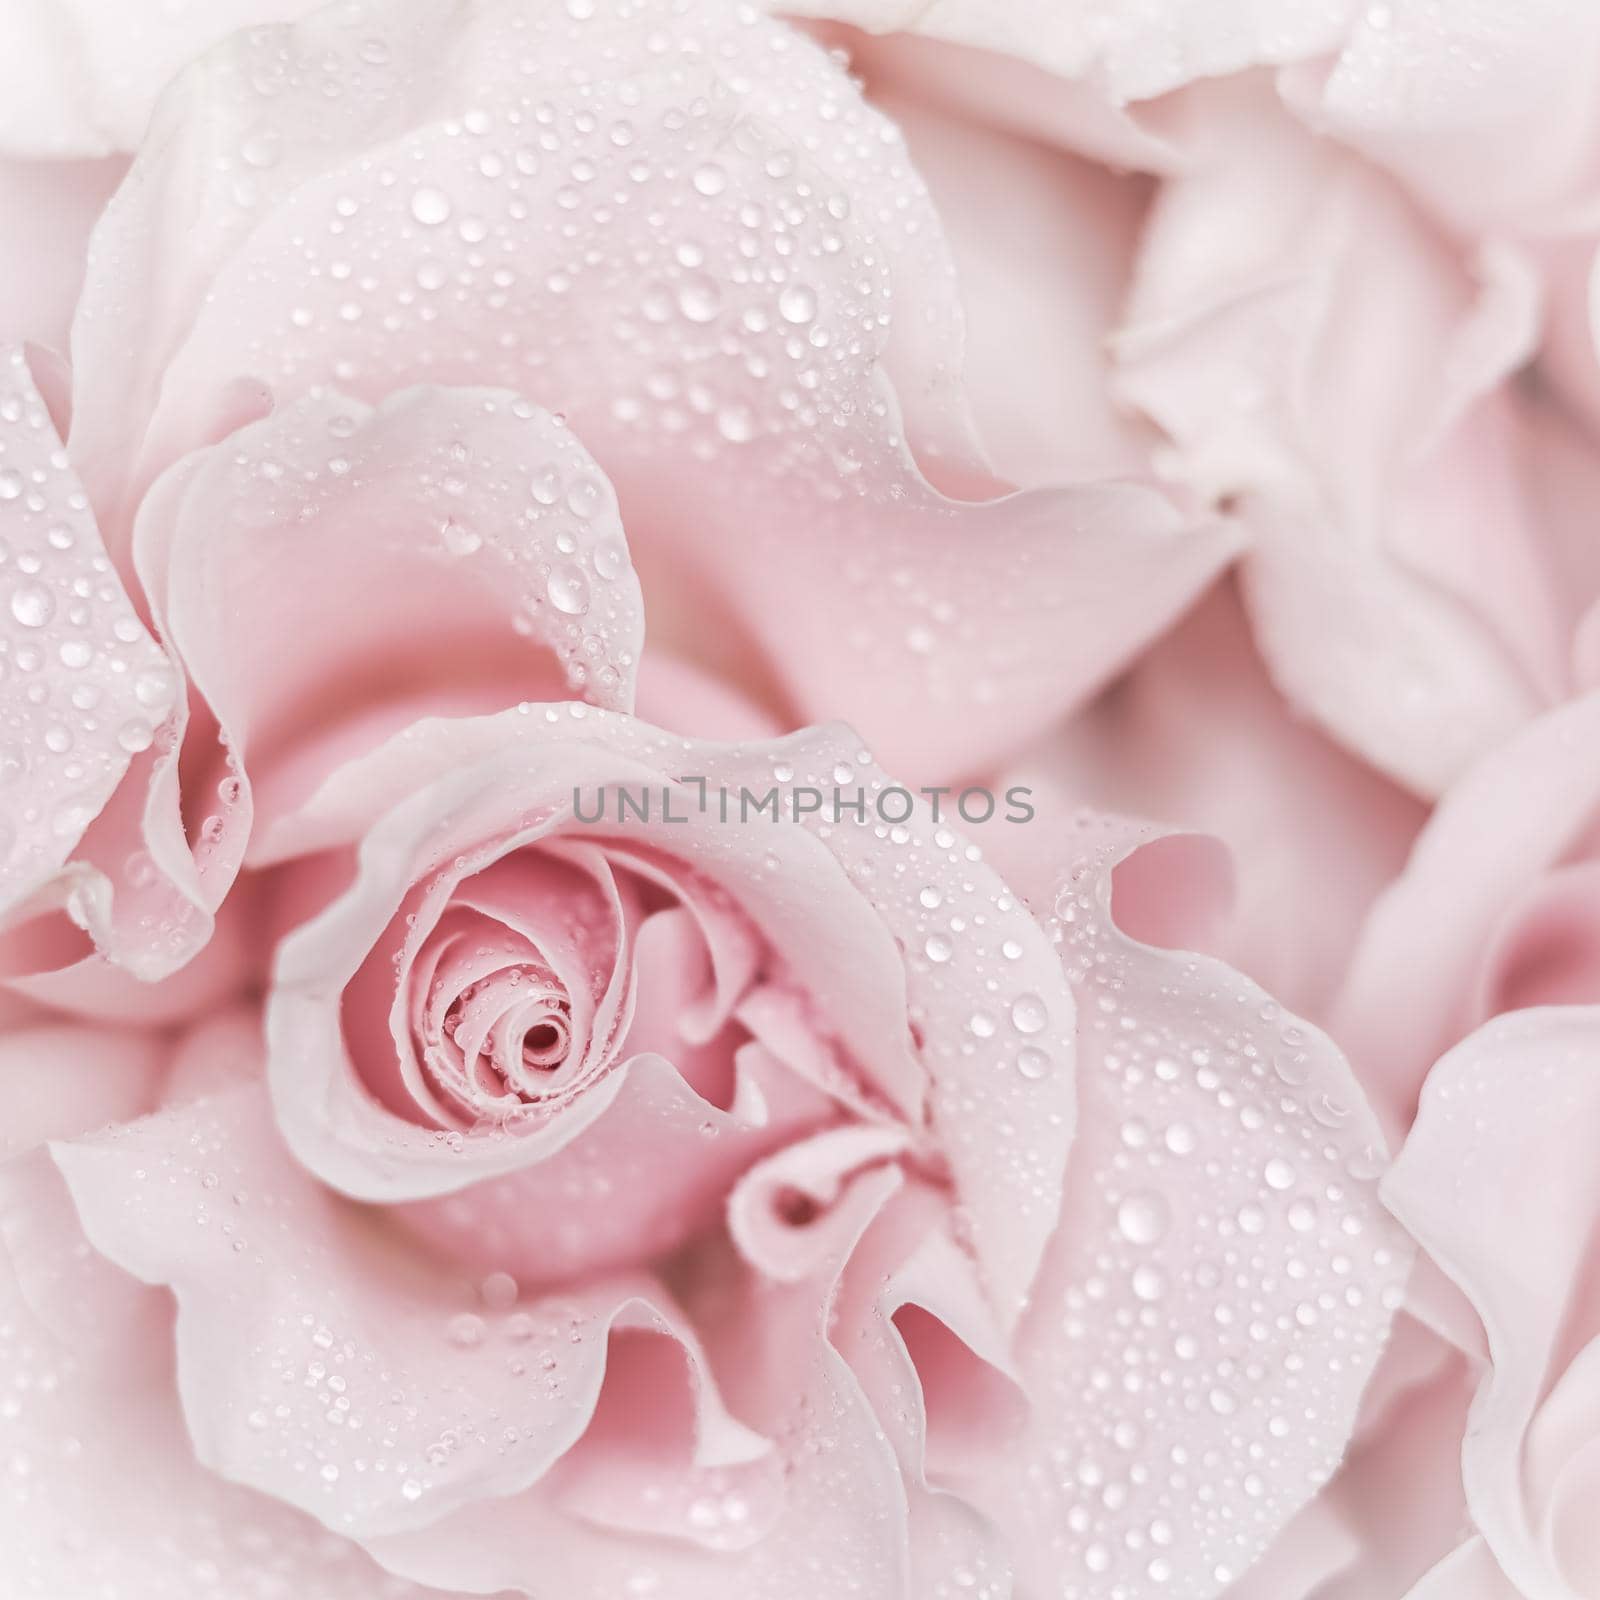 Pink rose flower. Macro flowers background for holiday brand design